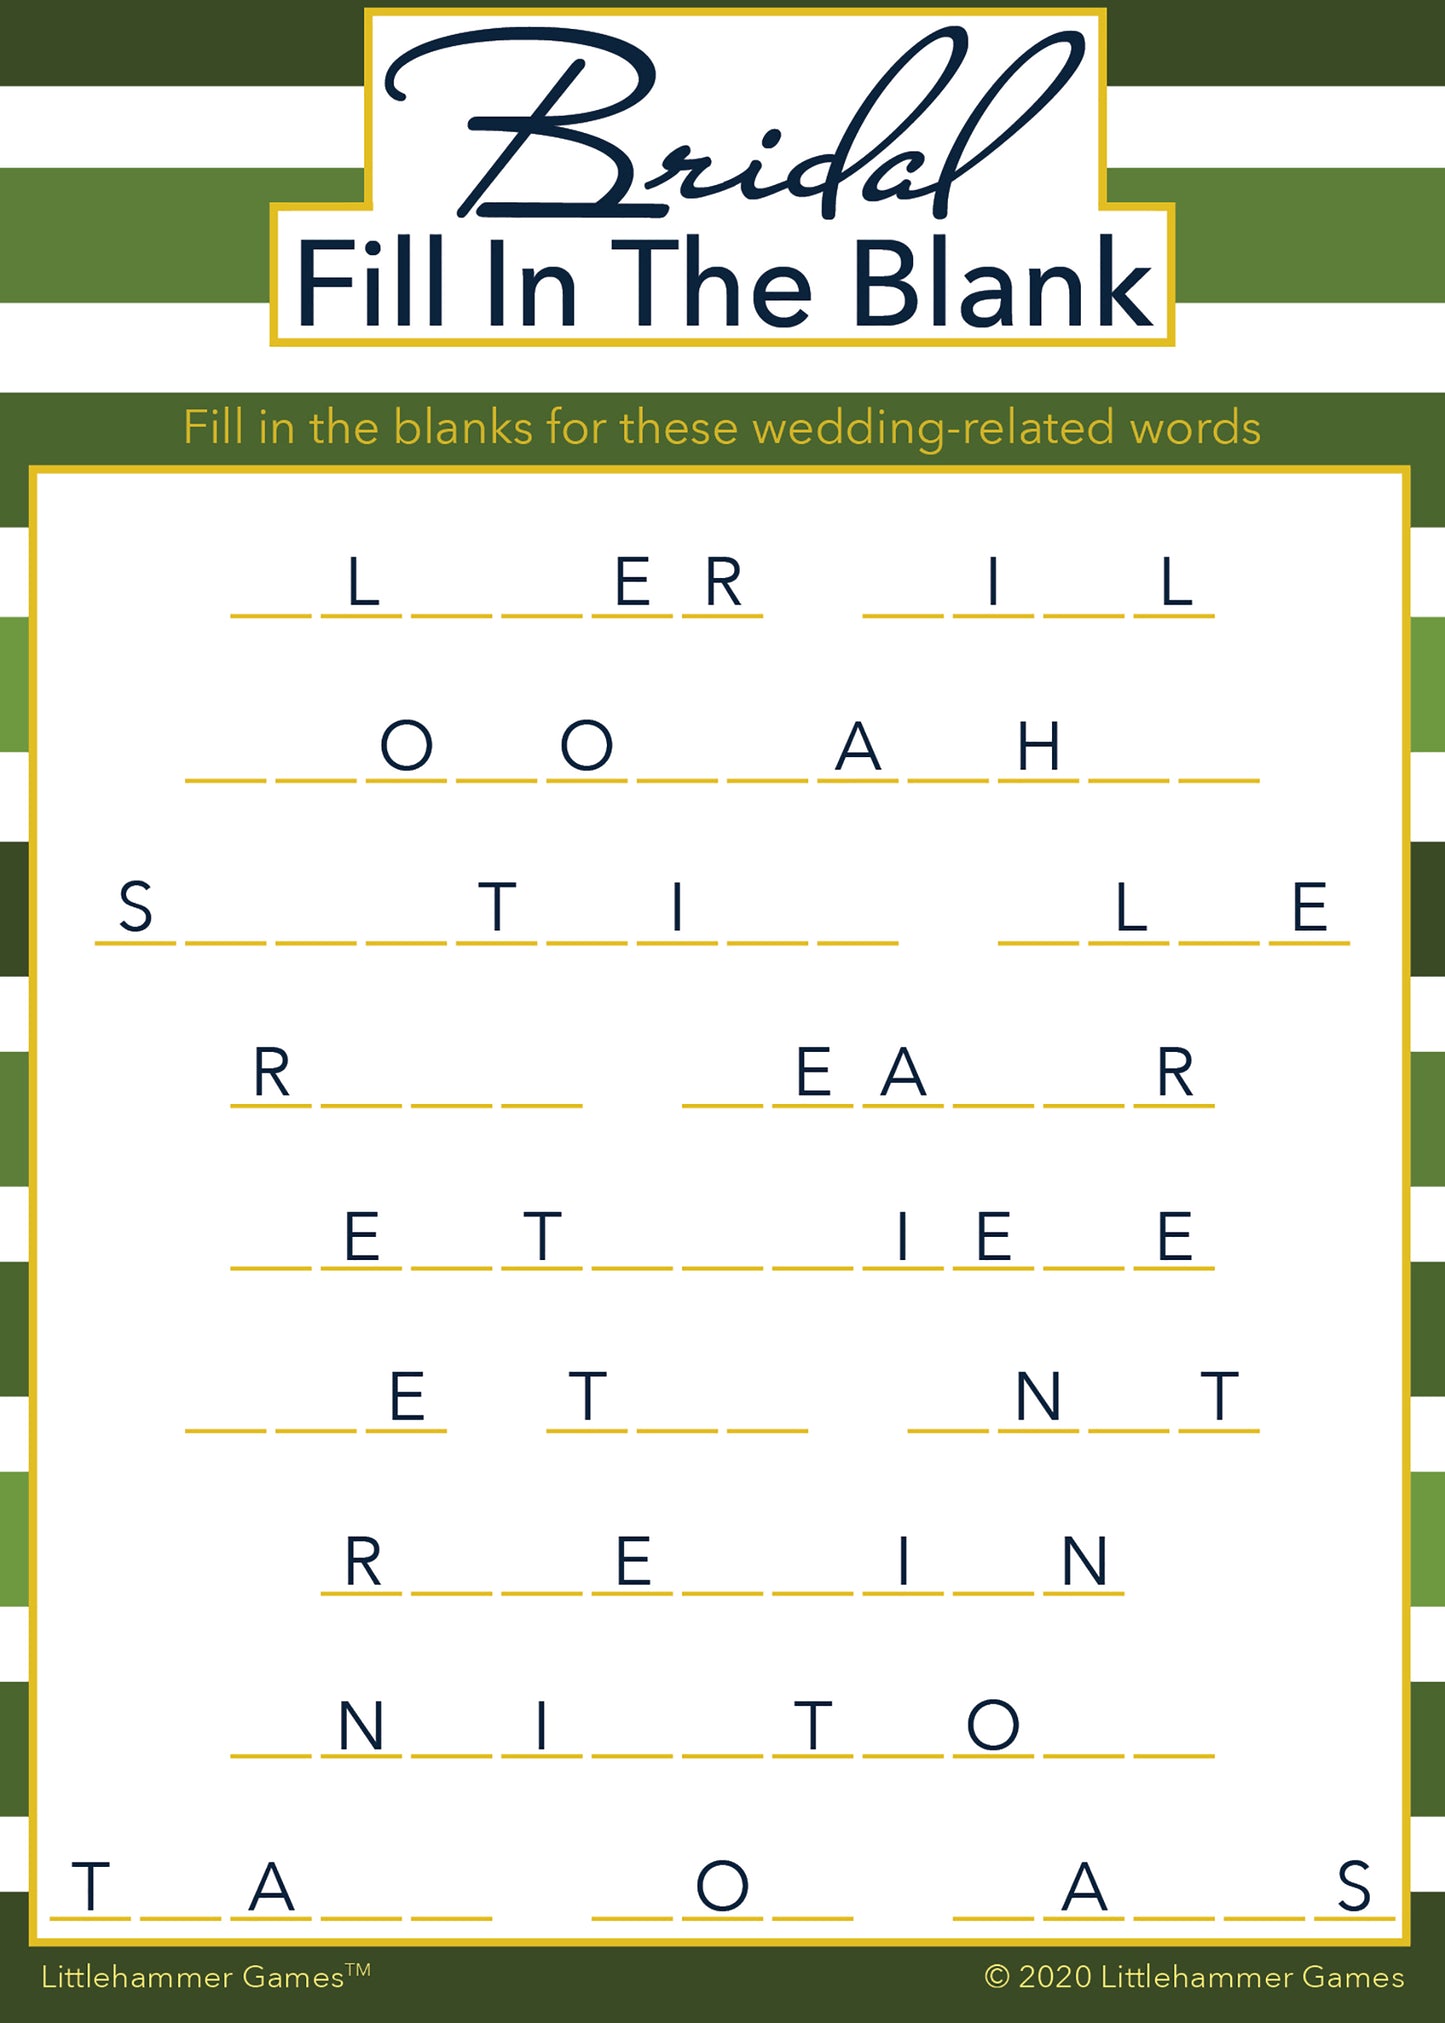 Bridal Fill in the Blank game card with a green-striped background